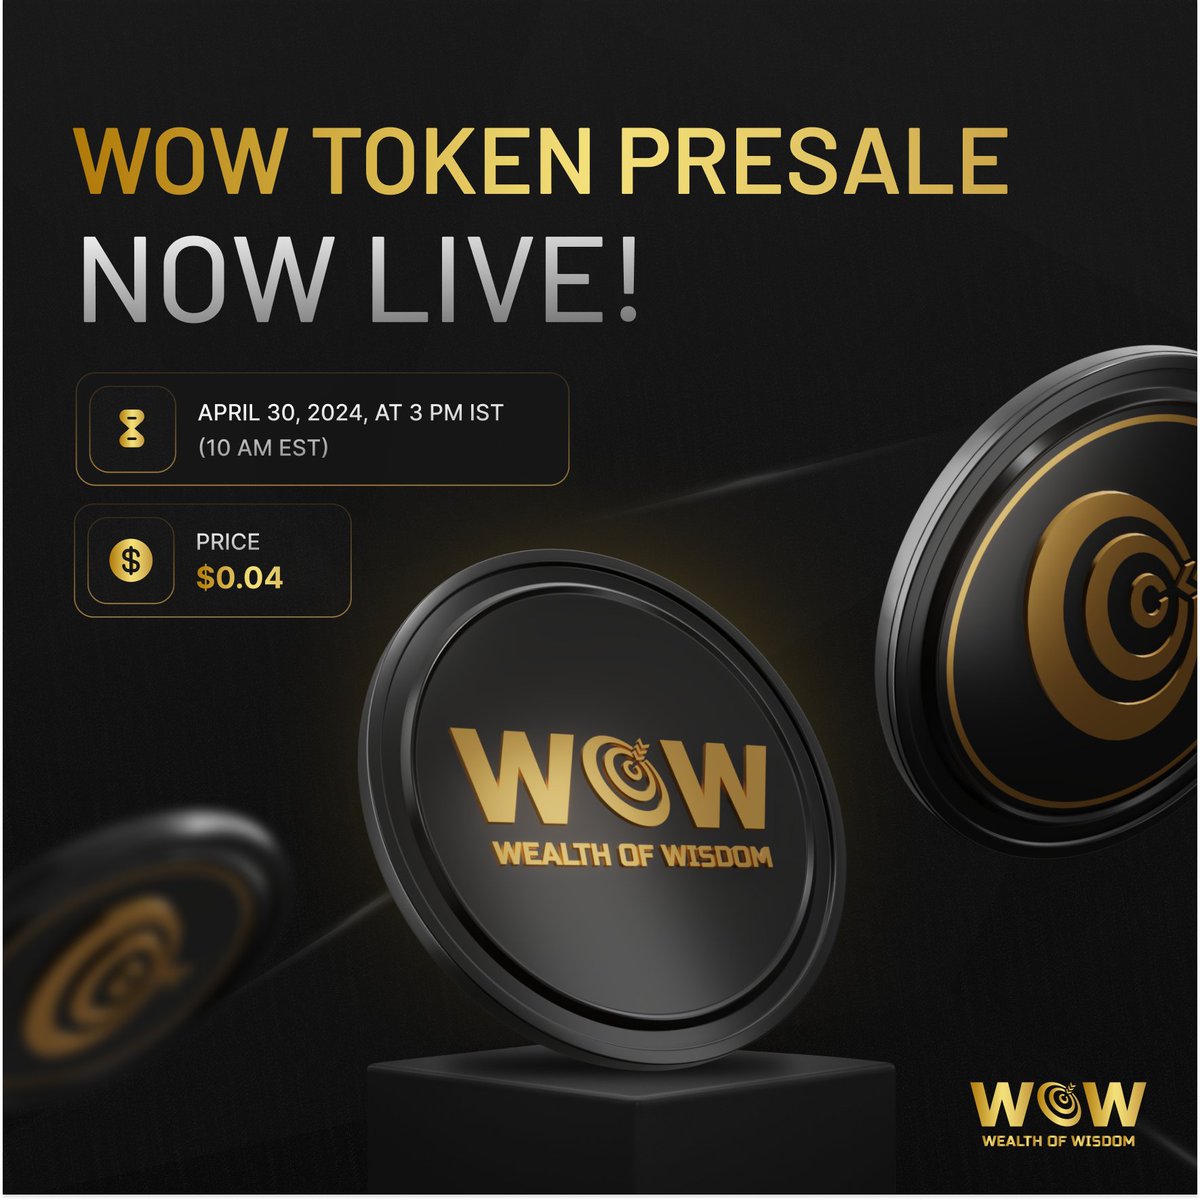 🔥 WOW Token Presale Now Live! 🔥
💵 Price: $0.04
🕒 Ends: April 30, 2024, at 3 PM IST (10 AM EST)
Don't miss out—get your WOW Tokens before it's too late! ⏳ #WOWToken #CryptoPresale
Act fast and secure your future in crypto! 🚀✨